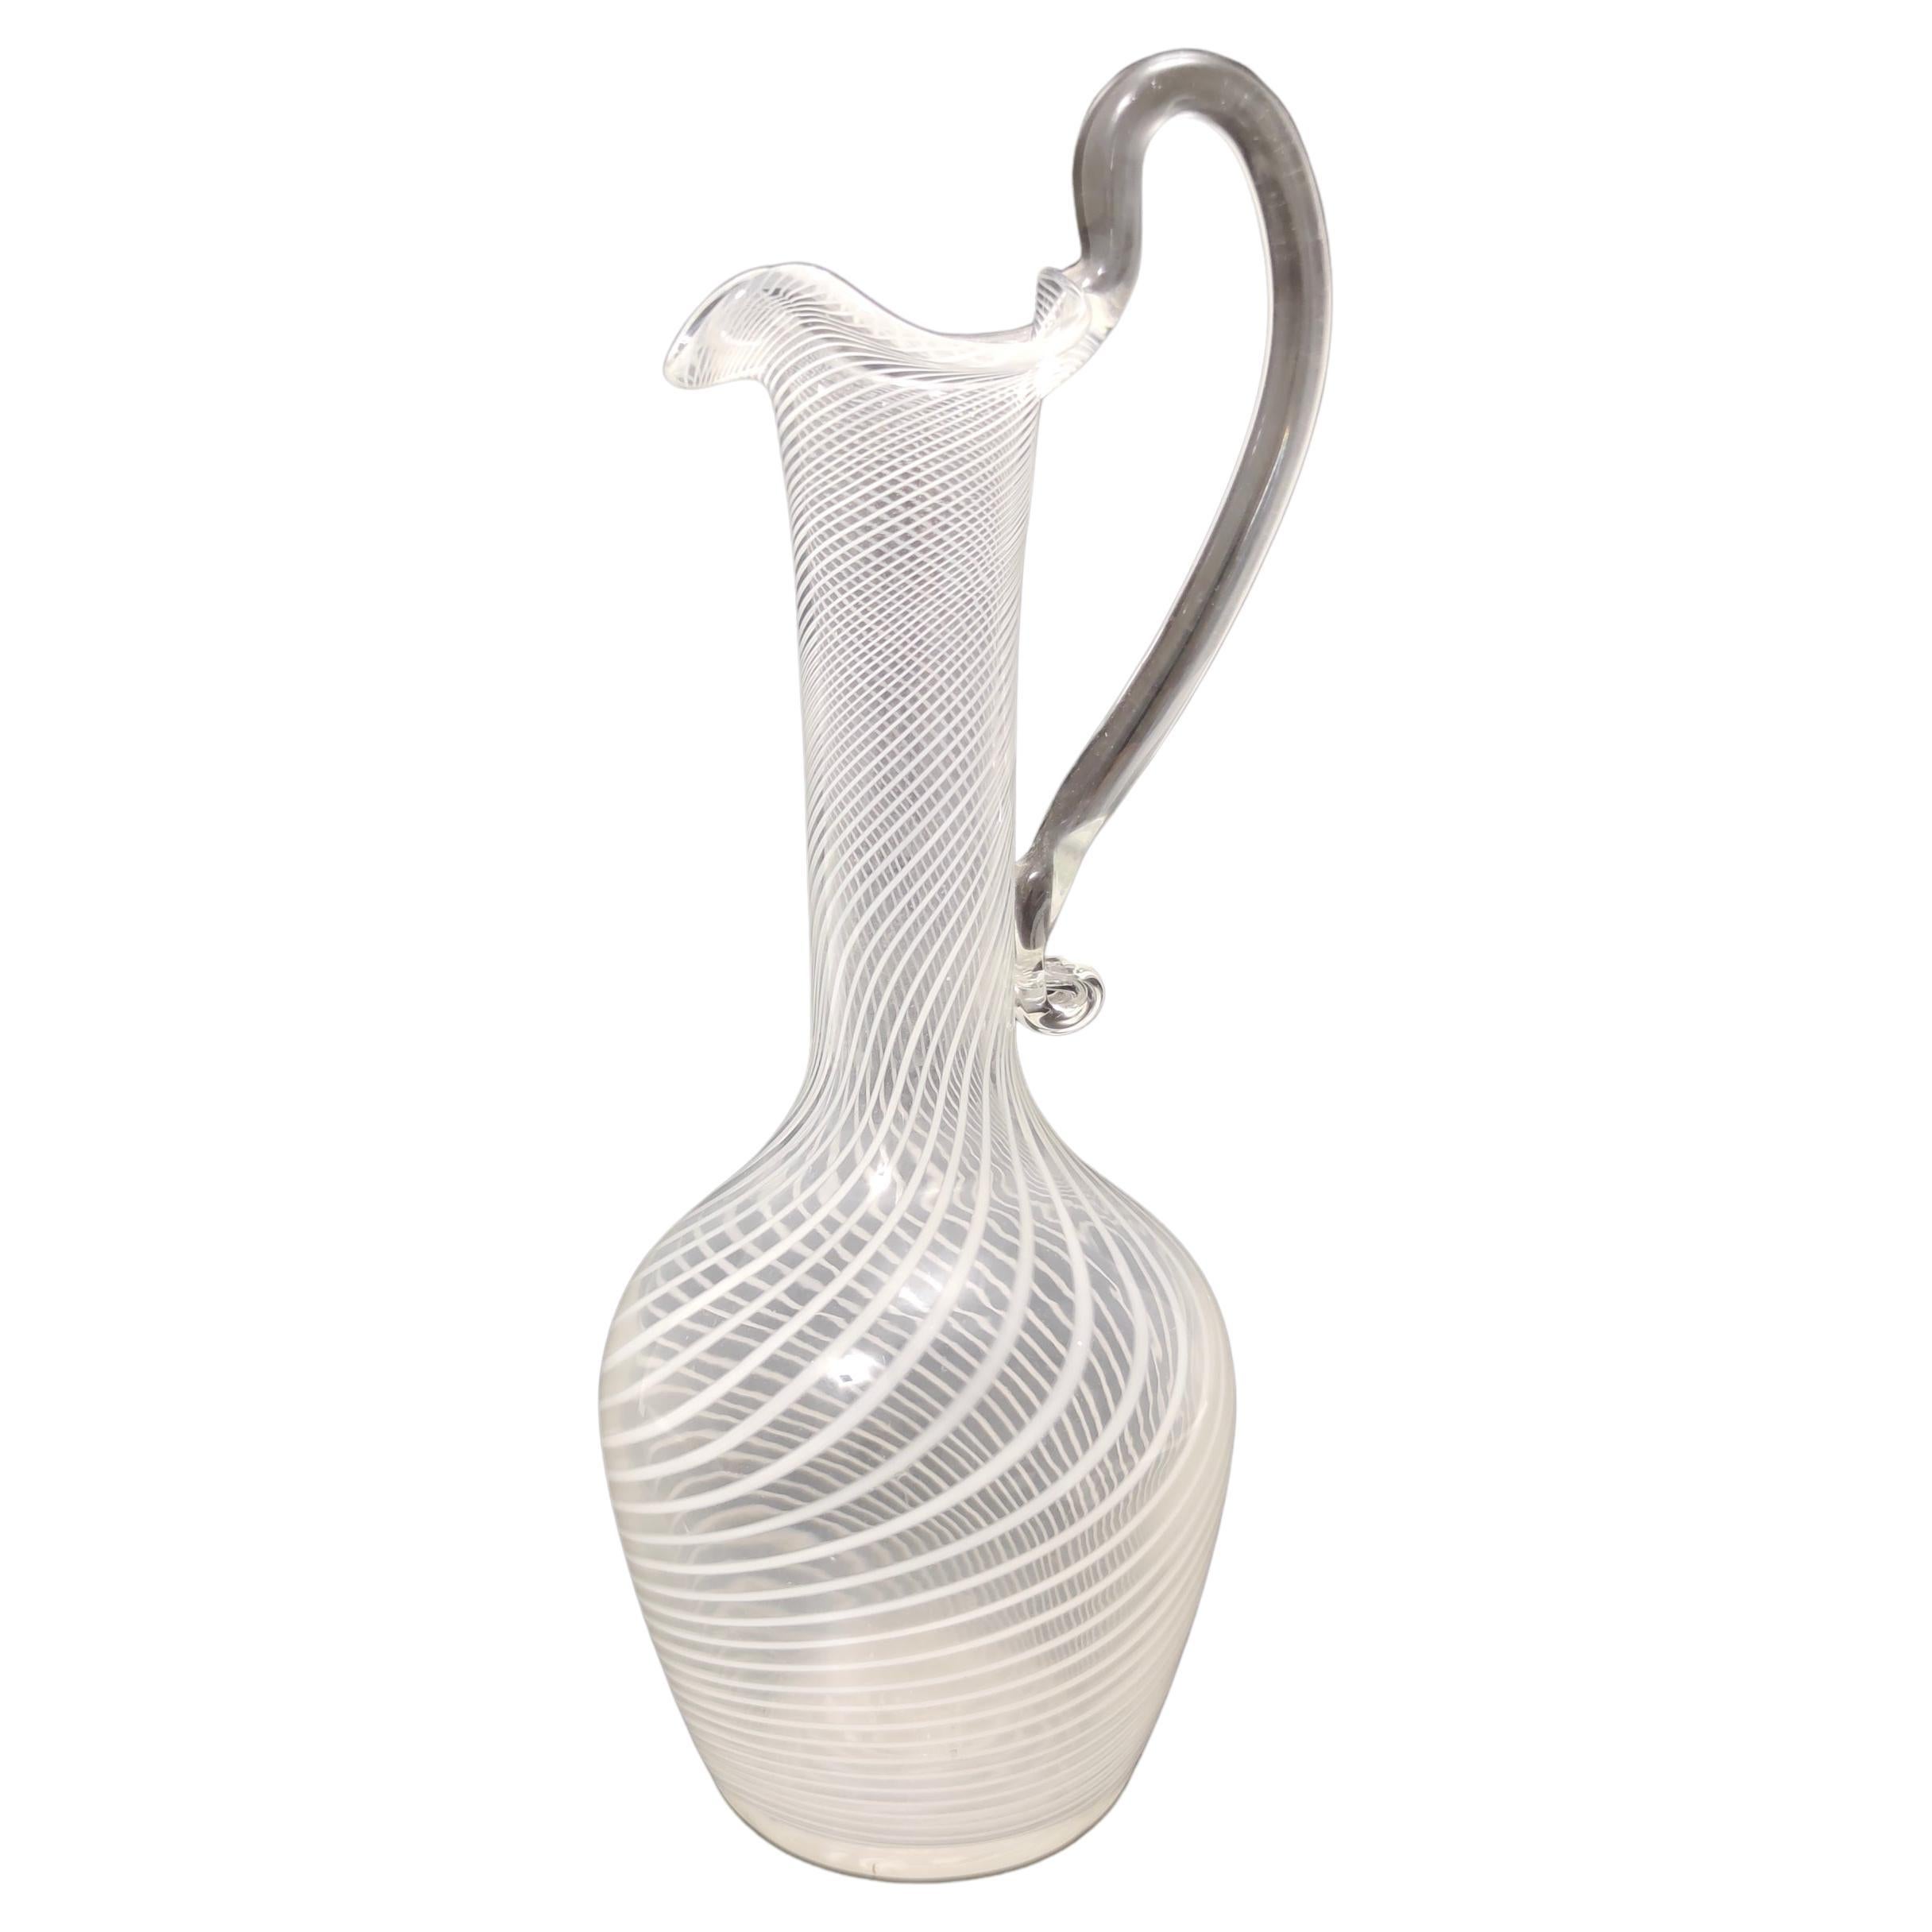 Murano Glass Pitcher Vase with White and Transparent Canes, Italy